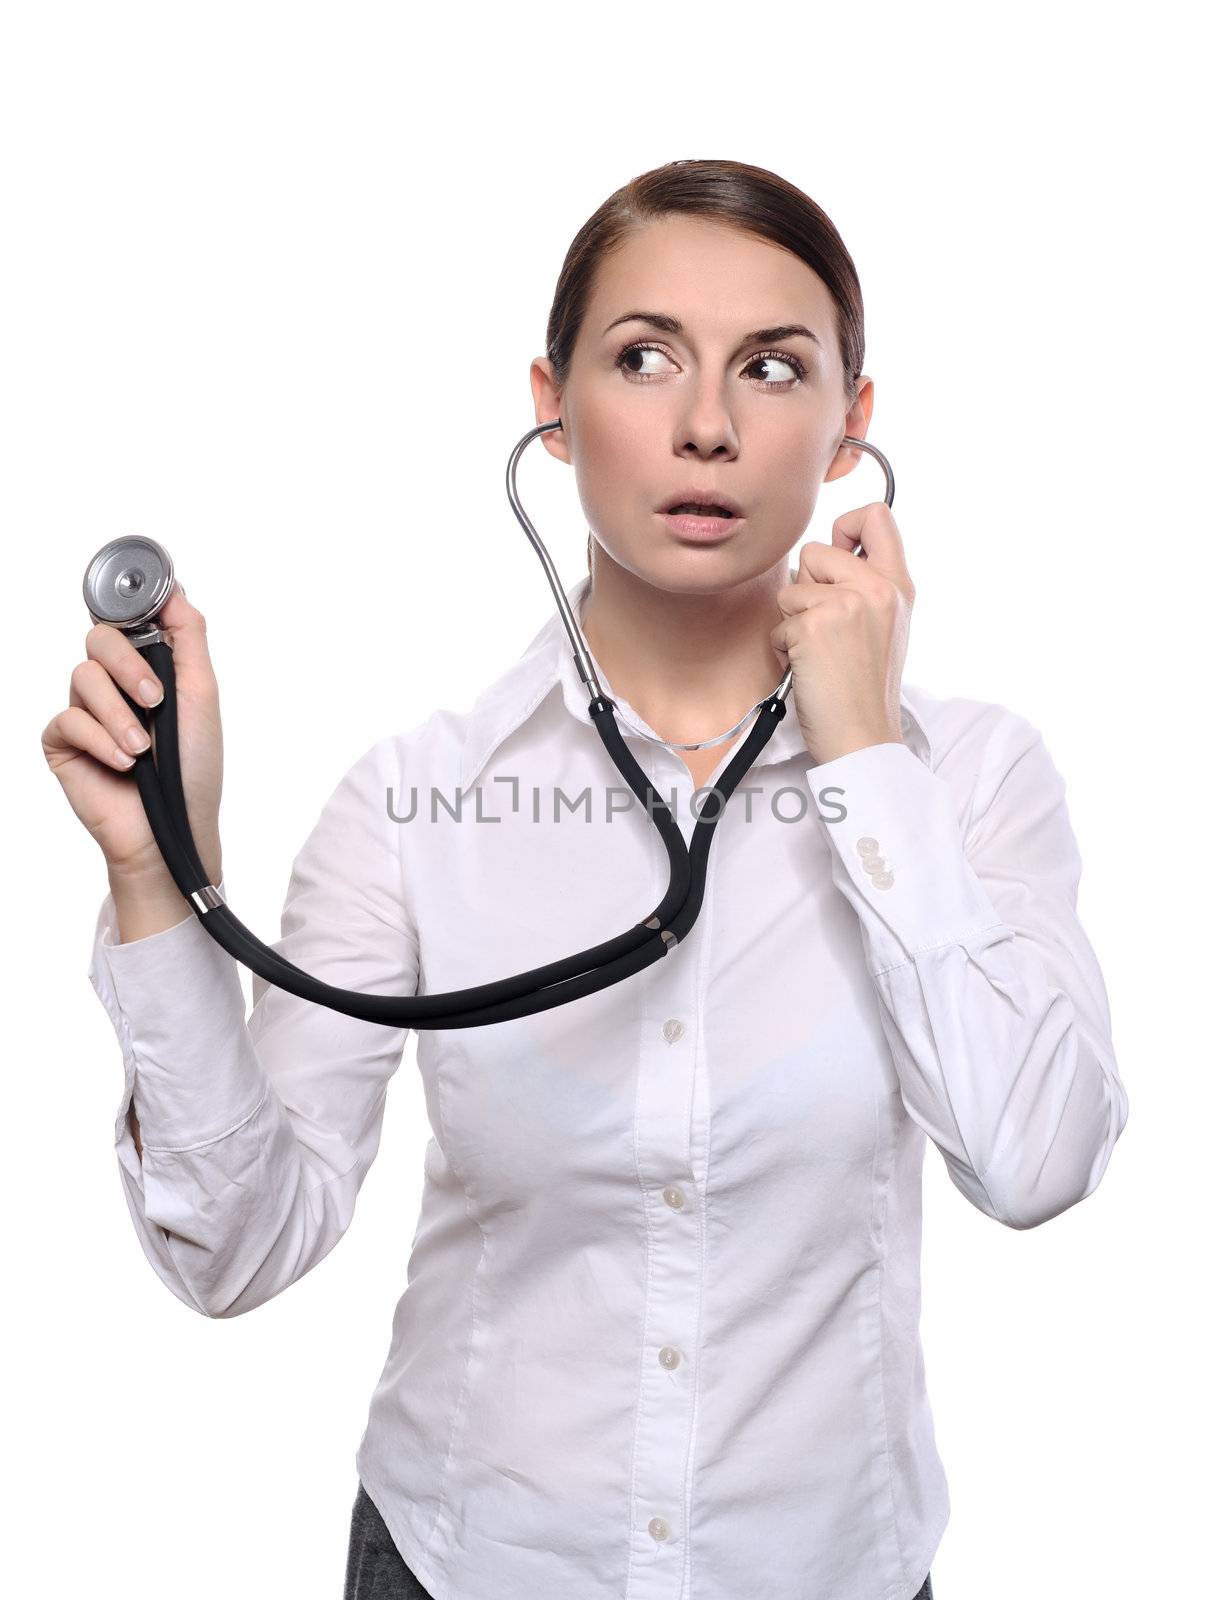 Female doctor listen with a stethoscope by kirs-ua